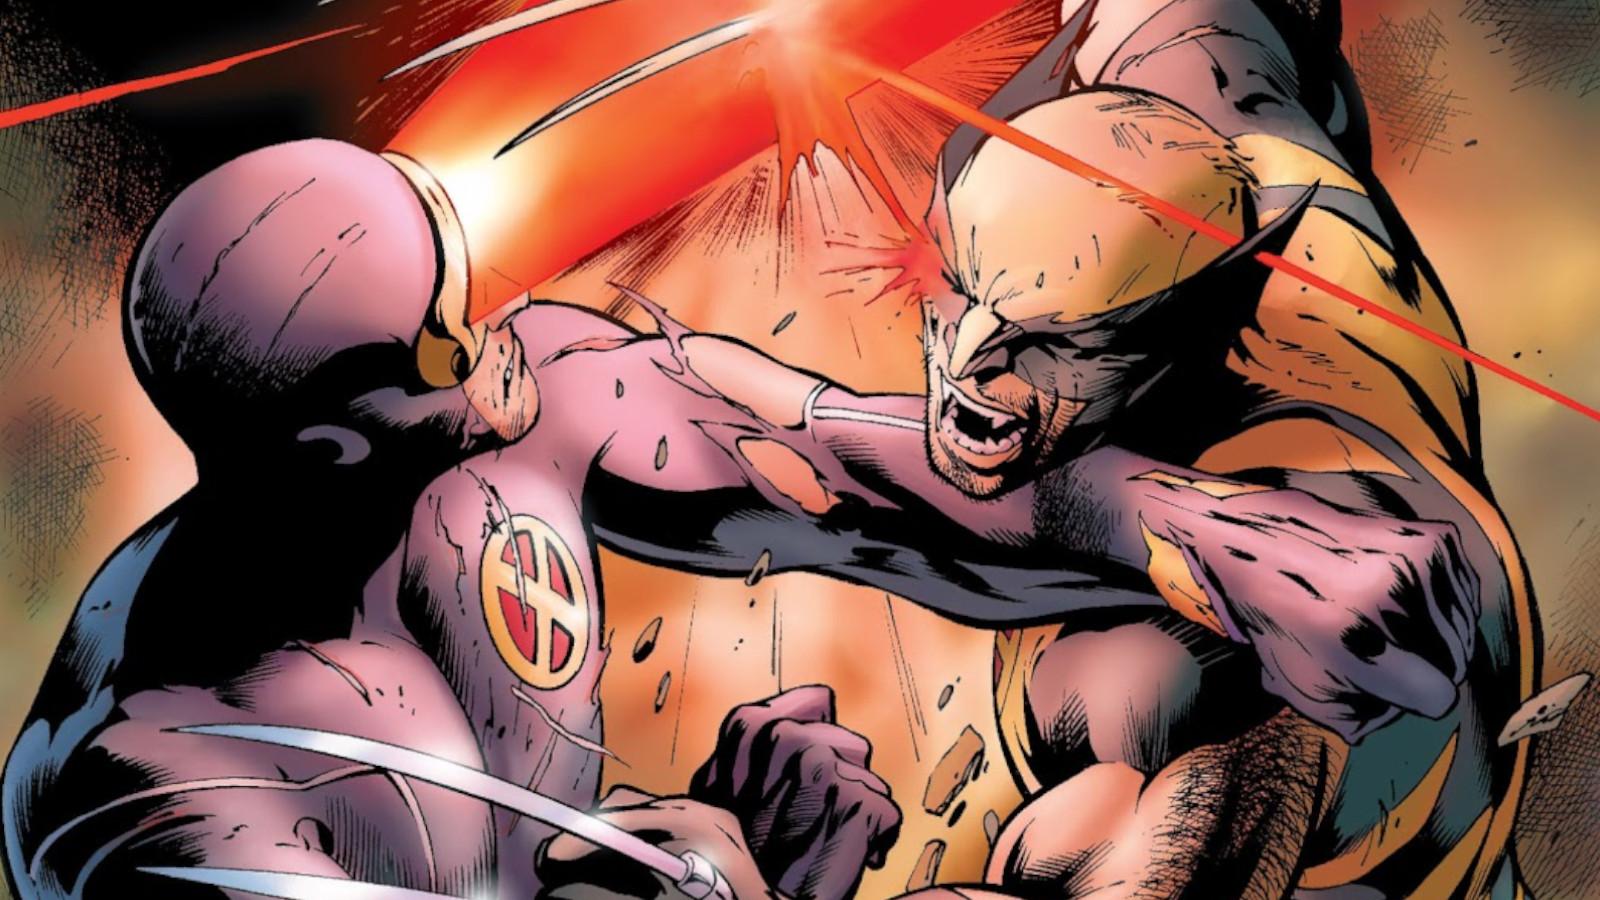 Wolverine fights Cyclops